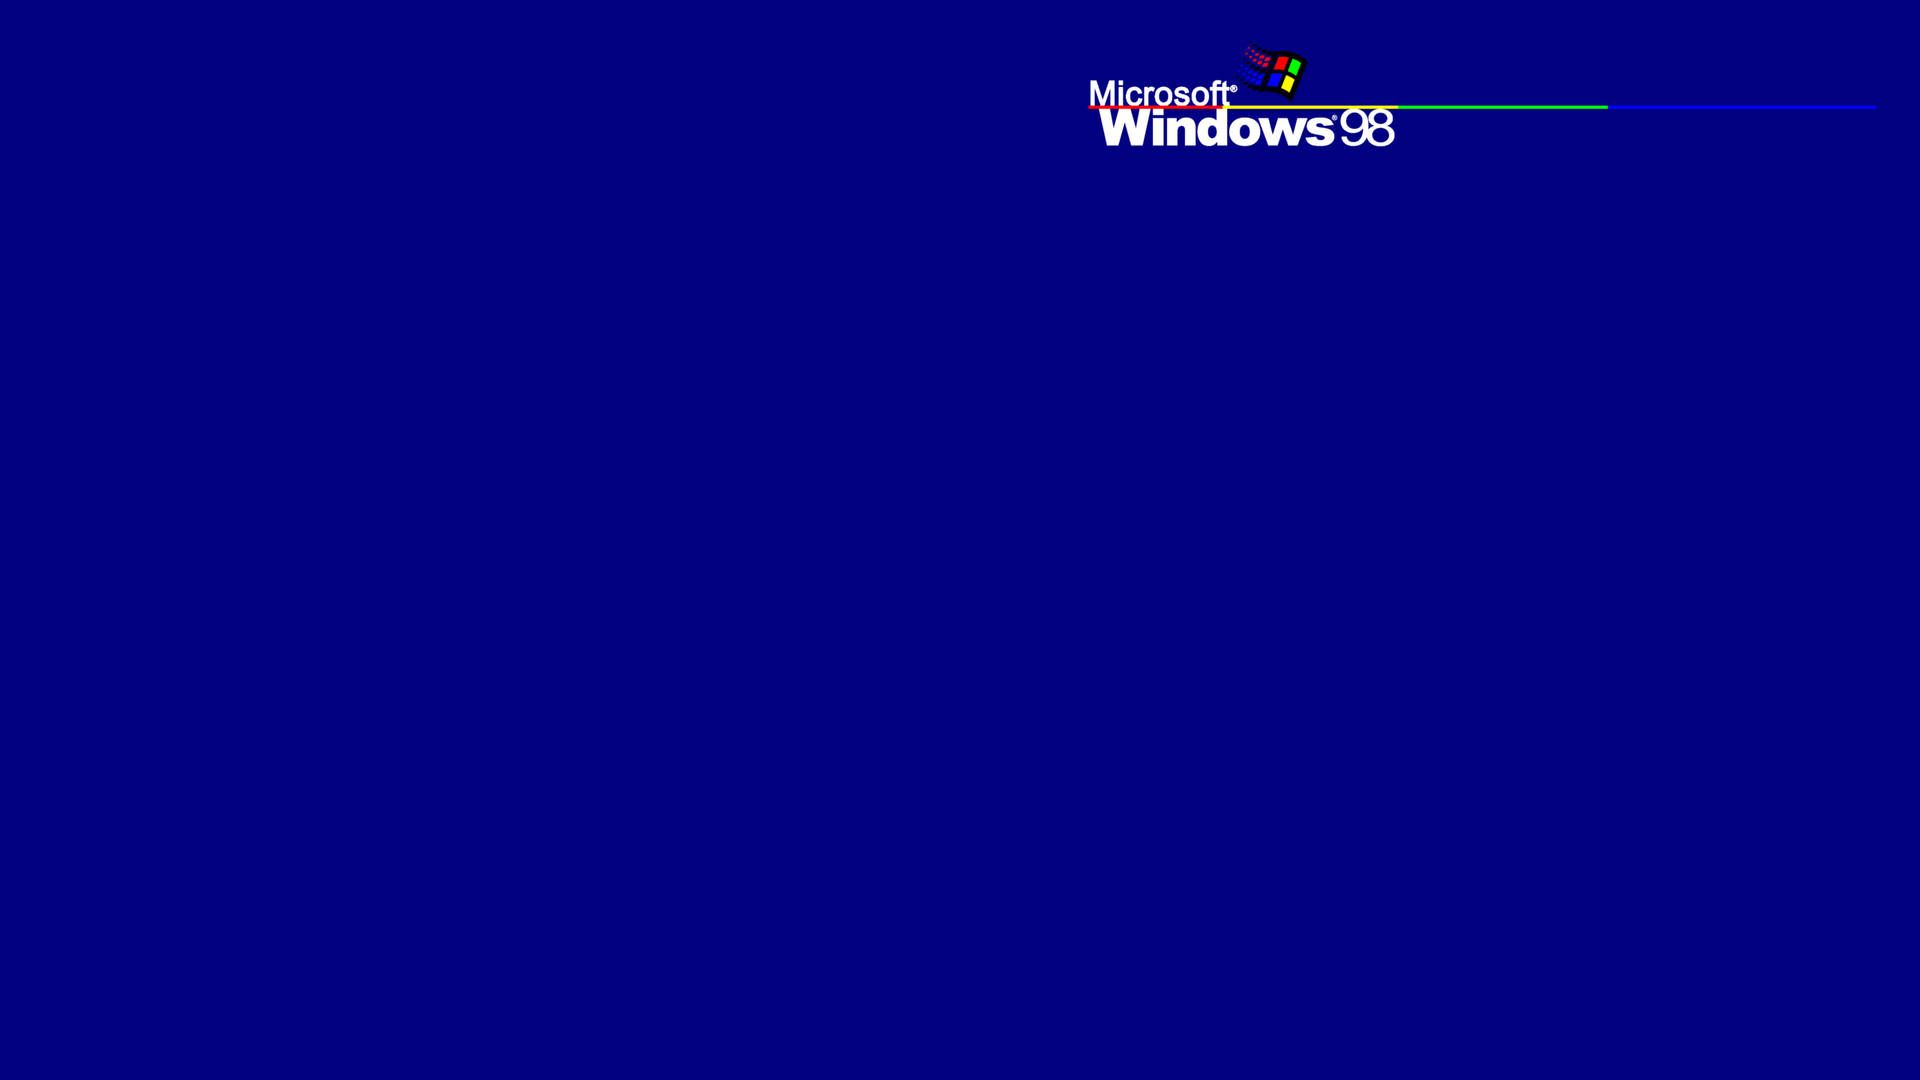 Windows 98 wallpaper with the logo on a blue background - Windows 98